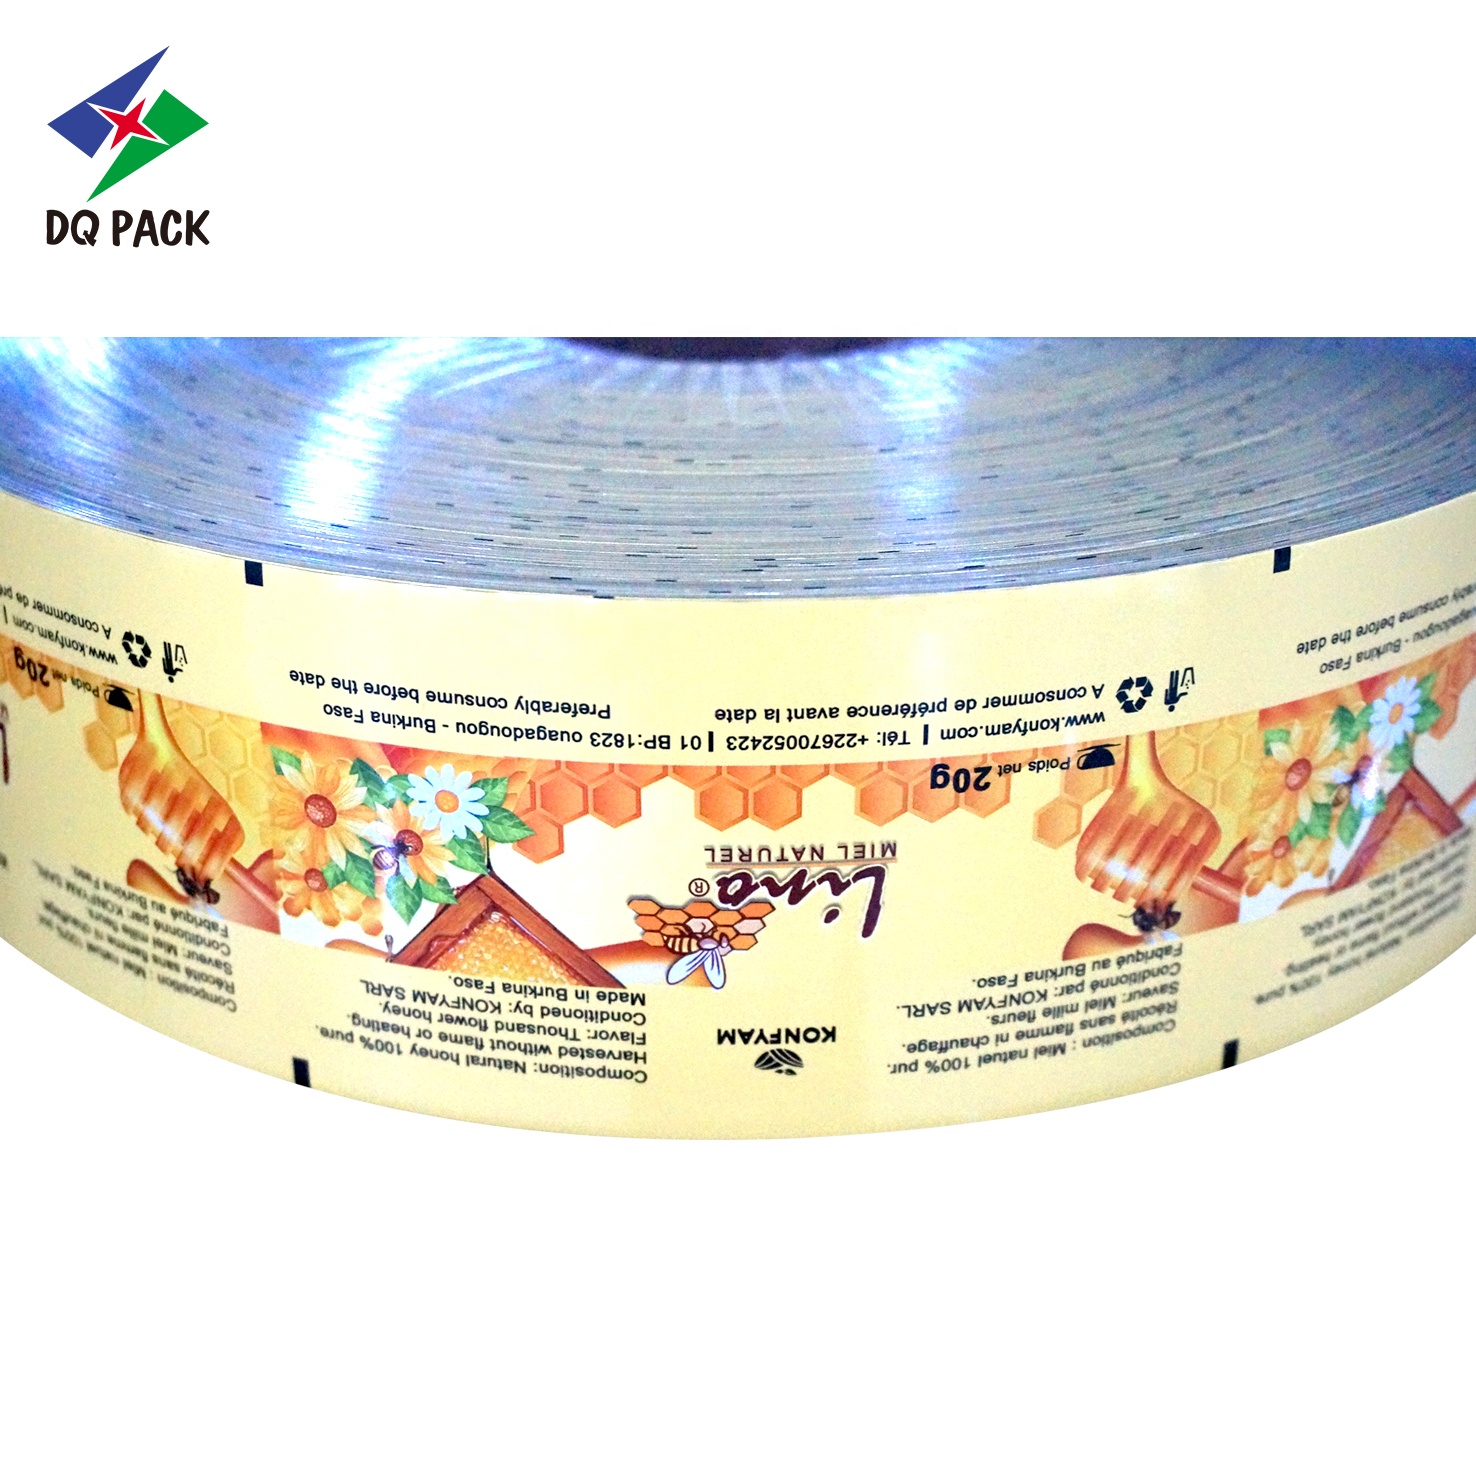 DQ PACK Chinese Manufacturers Custom Printed Laminated Plastic Metallized Foil Snack Packaging Films Rolls